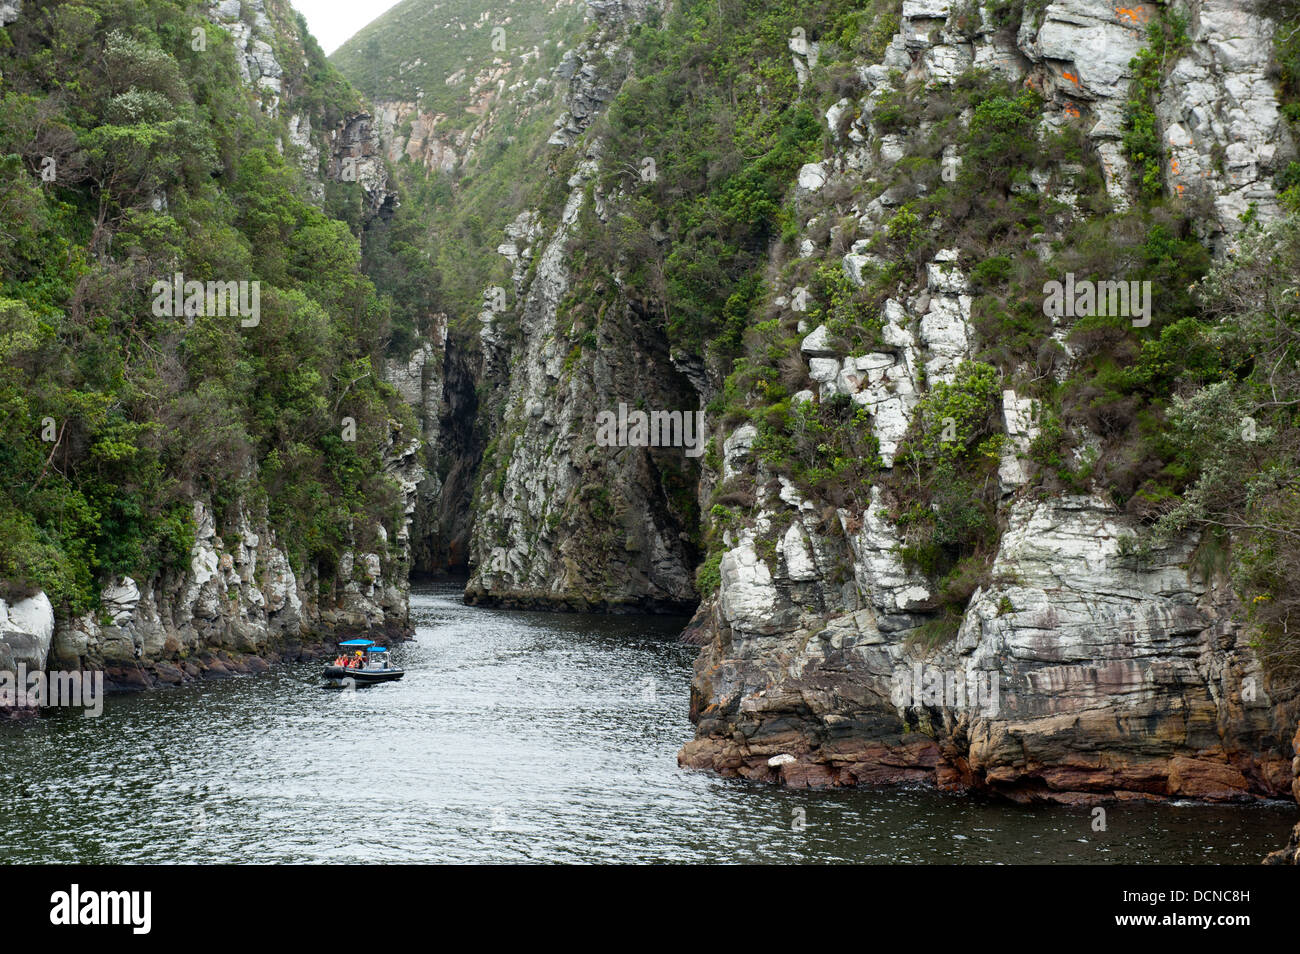 Boat trip in the Storms River Gorge, Tsitsikamma, Garden Route National Park, South Africa Stock Photo